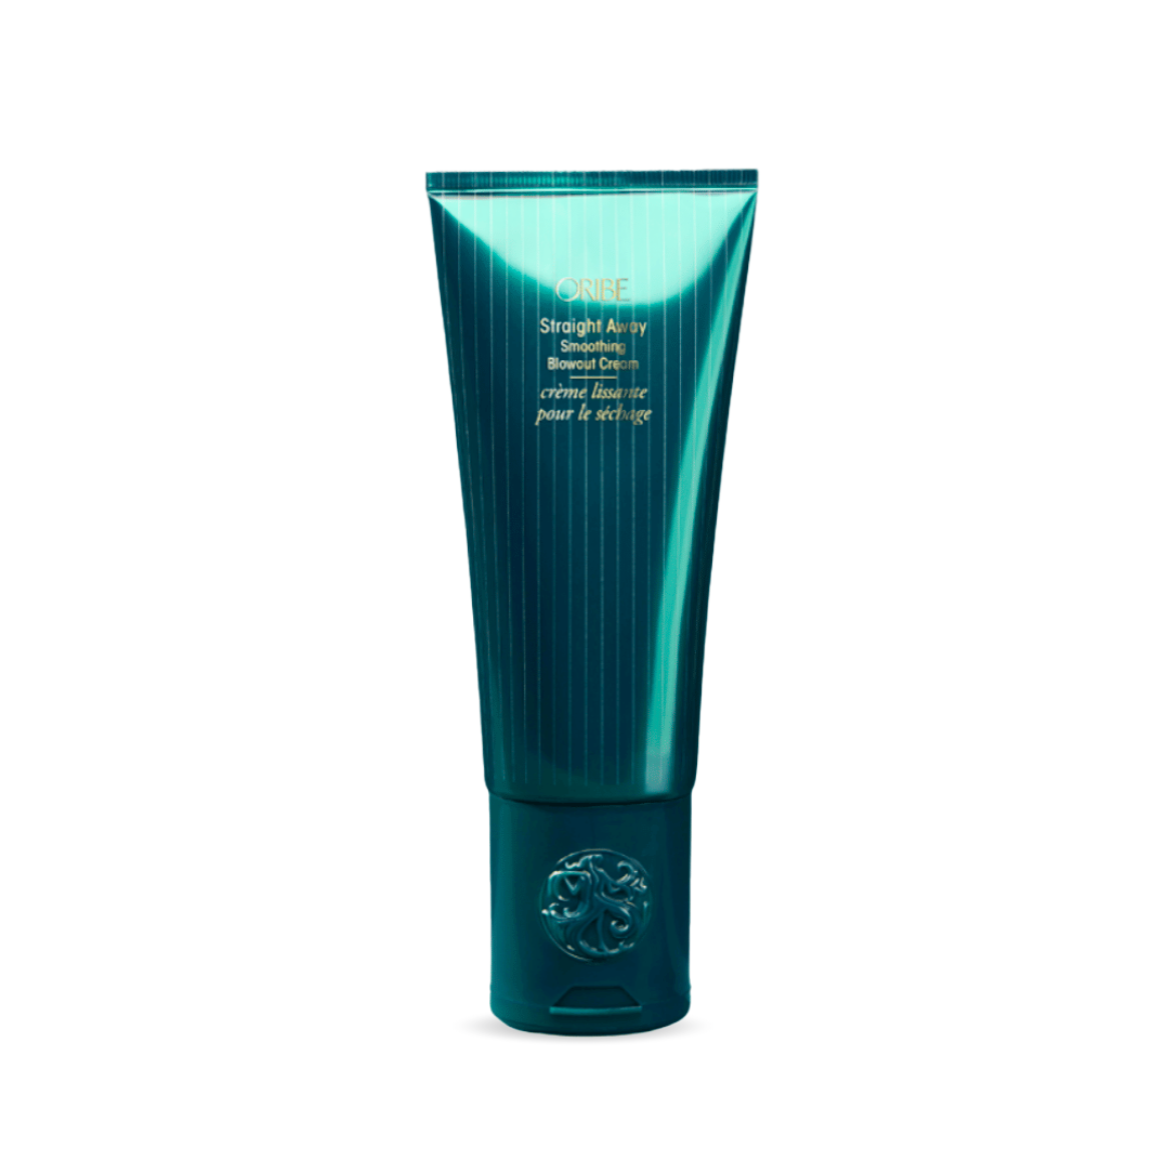 Oribe Straight Away Smoothing Blowout Cream 5 Oz. tube, a teal-colored hair styling product for creating sleek and straight hairstyles while offering heat protection and controlling frizz.